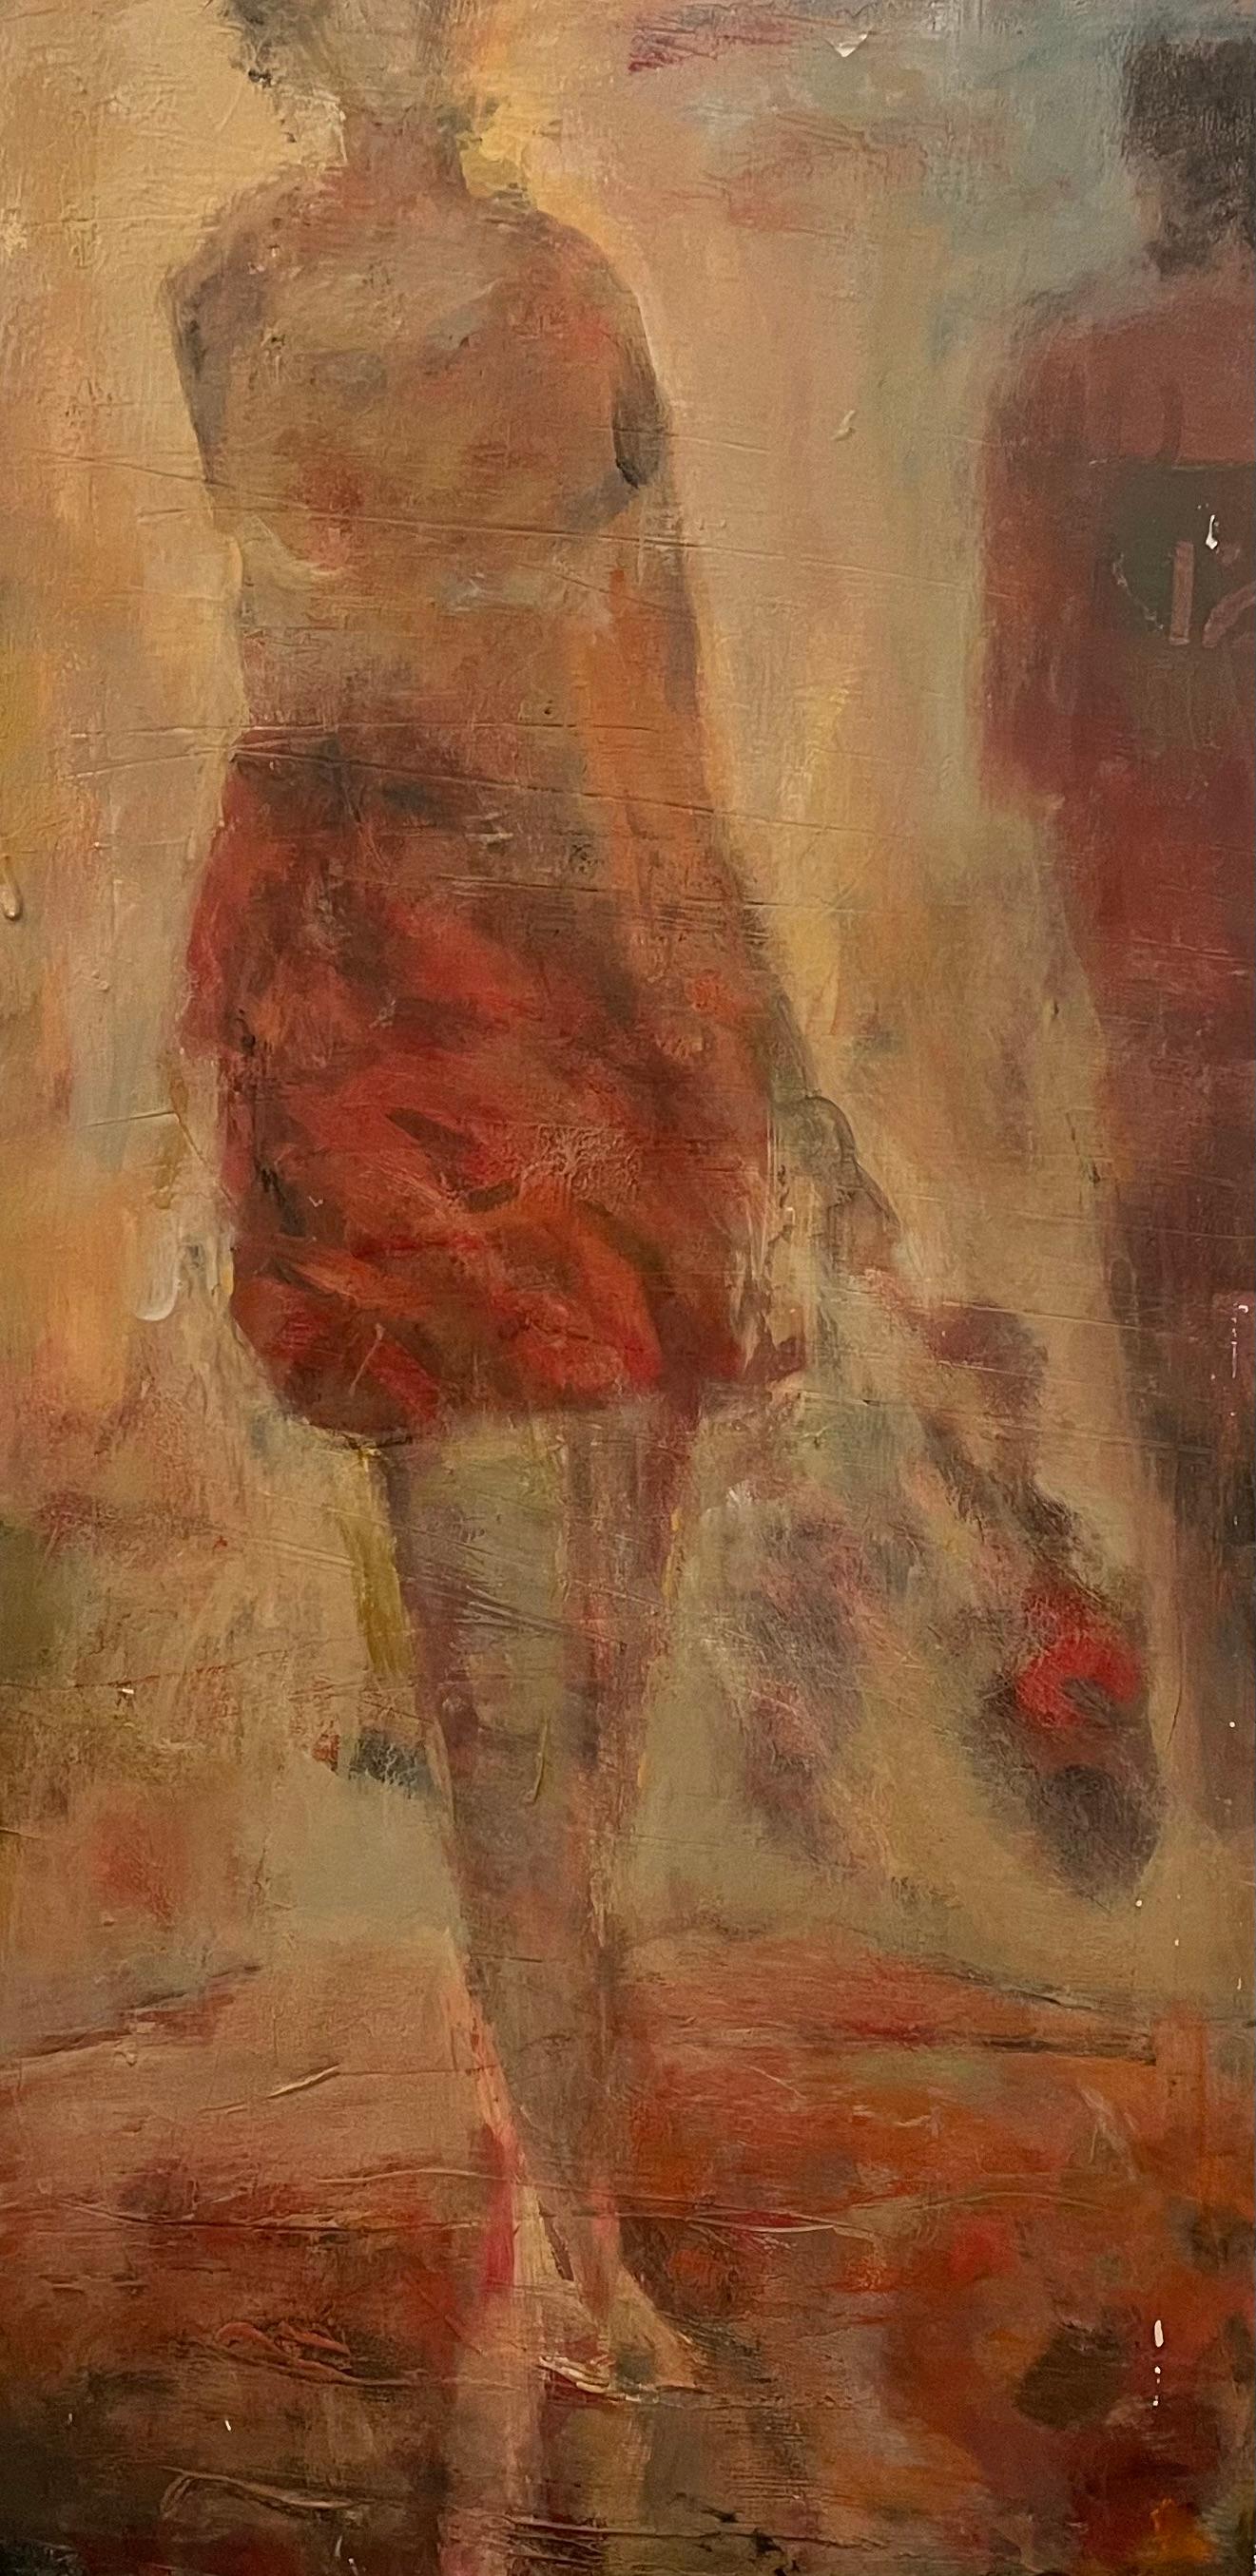 Helen Steele Figurative Painting – "In Passing" Contemporary Figurative Abstract Expressionist